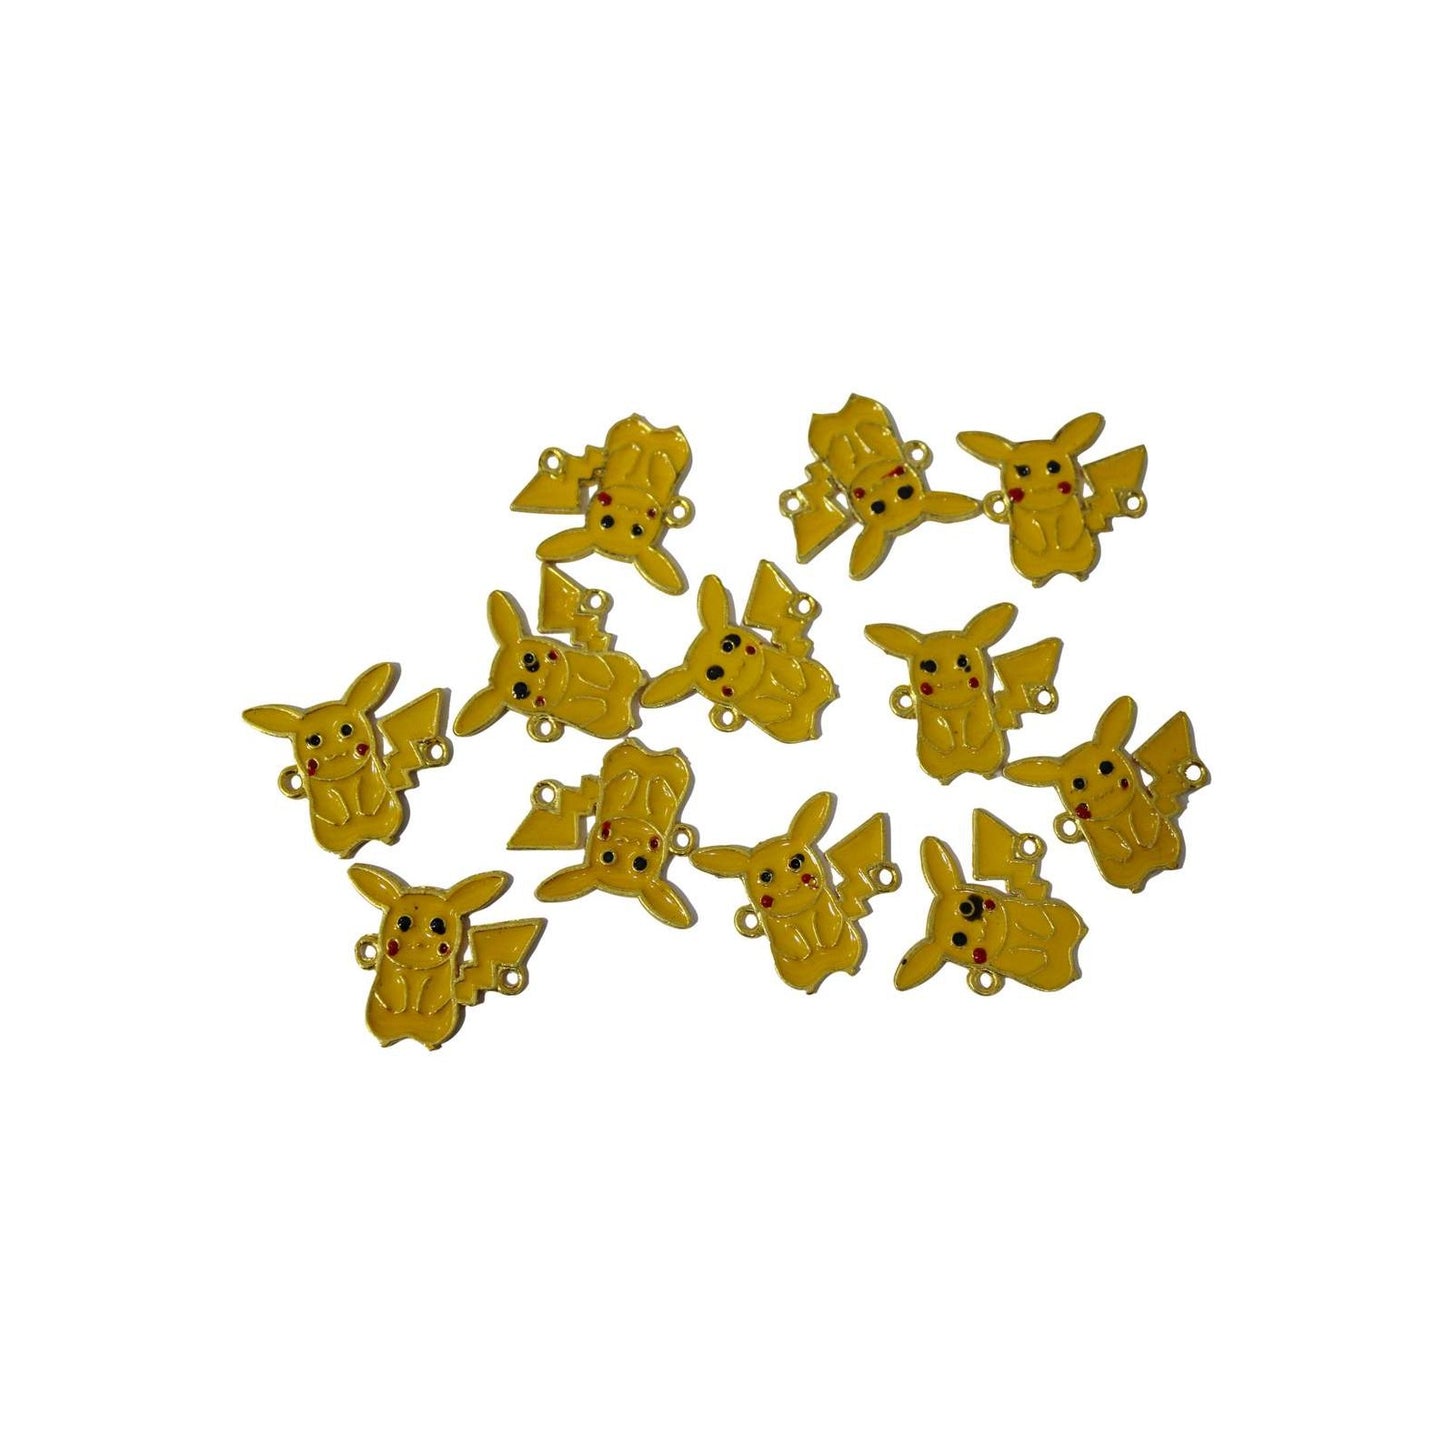 Indian Petals Painted Cute Metal Toons Motif for Jewelry, Craft or Decoration - 12414-16, Pikachu